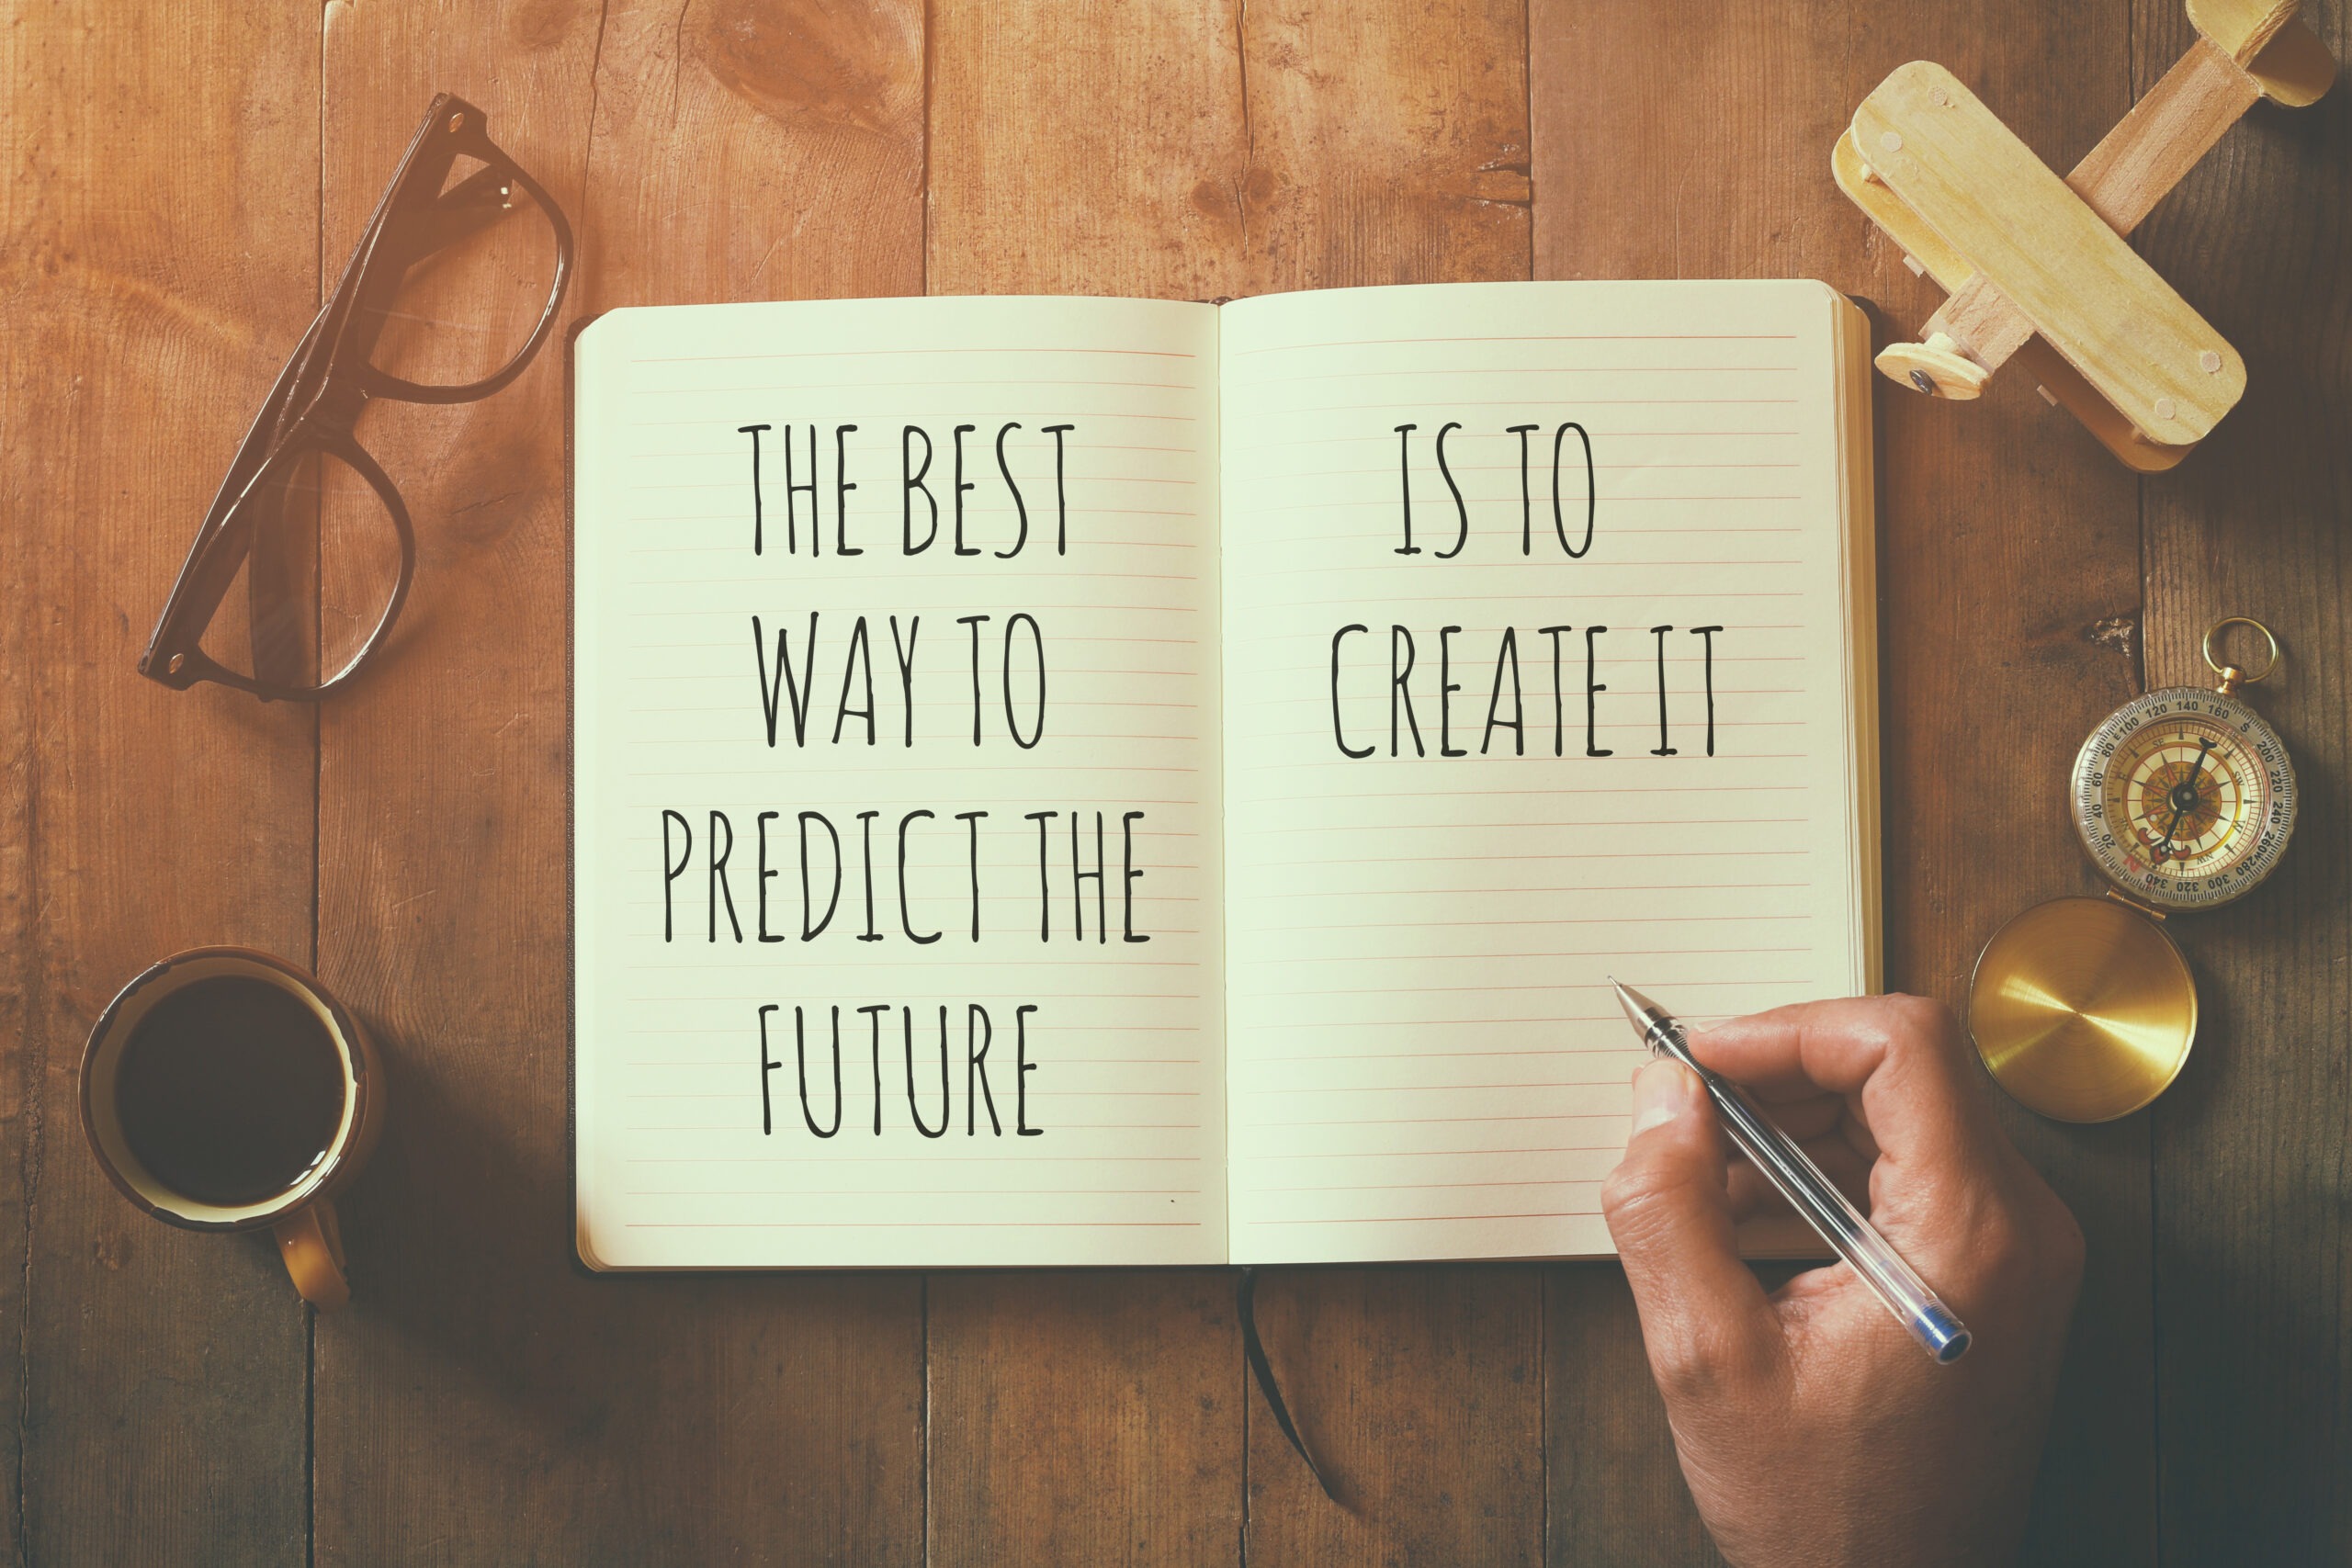 A hand holding a pen writes "The best way to predict the future is to create it" in a notebook, meaning you can't control the future, but you can learn to handle major life changes with grace.